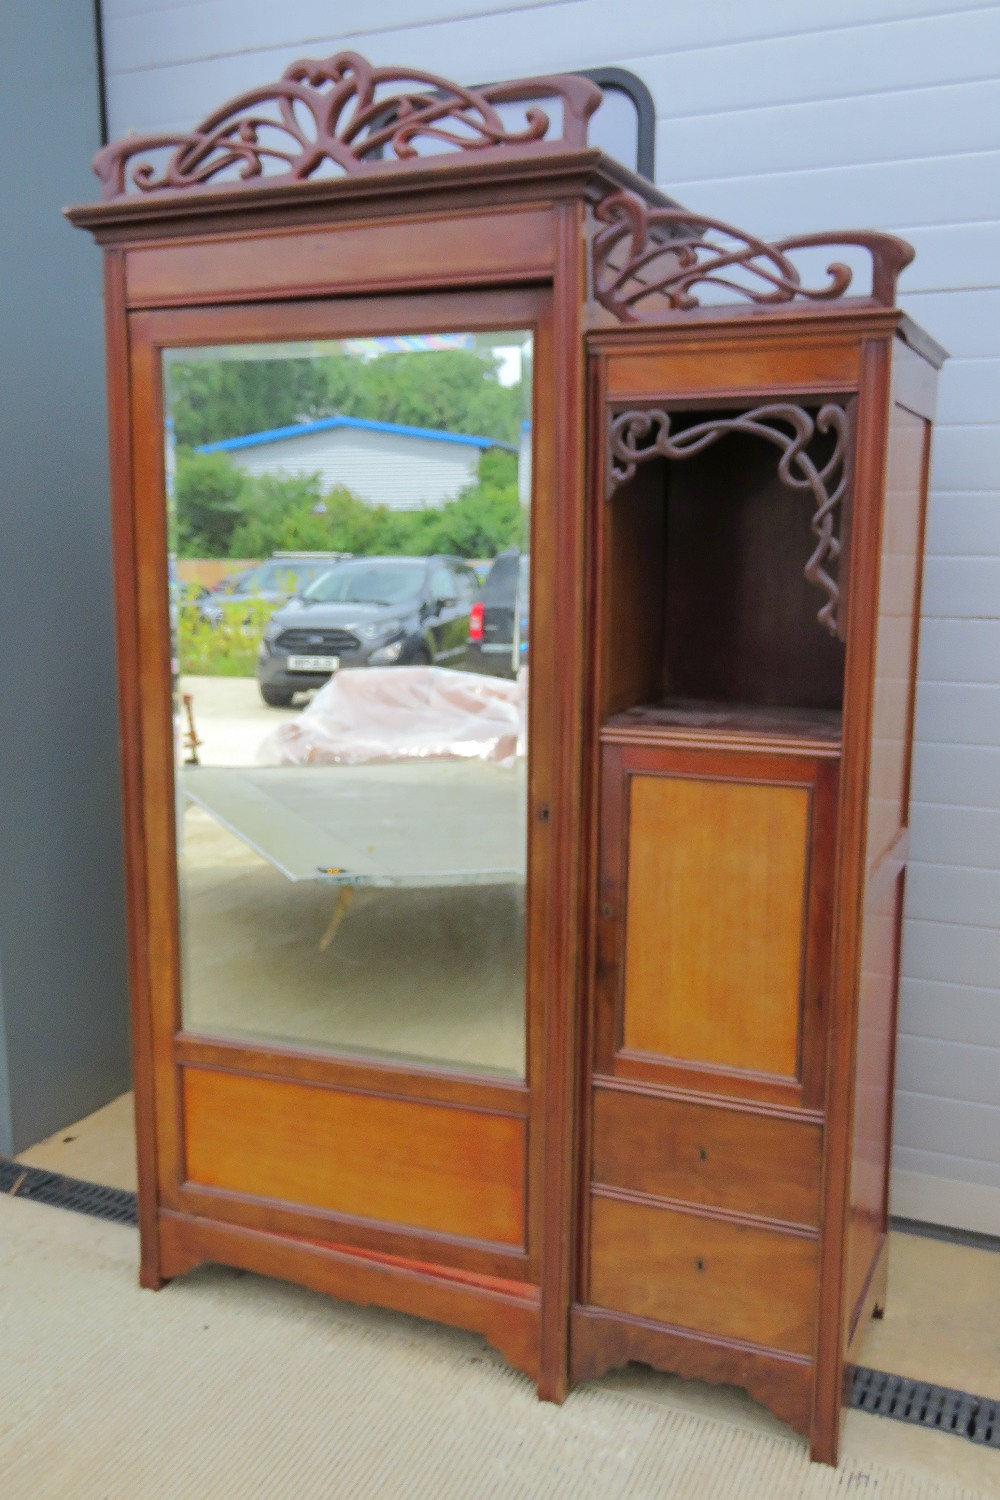 French Art Nouveau: a mahogany wardrobe (in the armoire style) with single bevelled plate glass